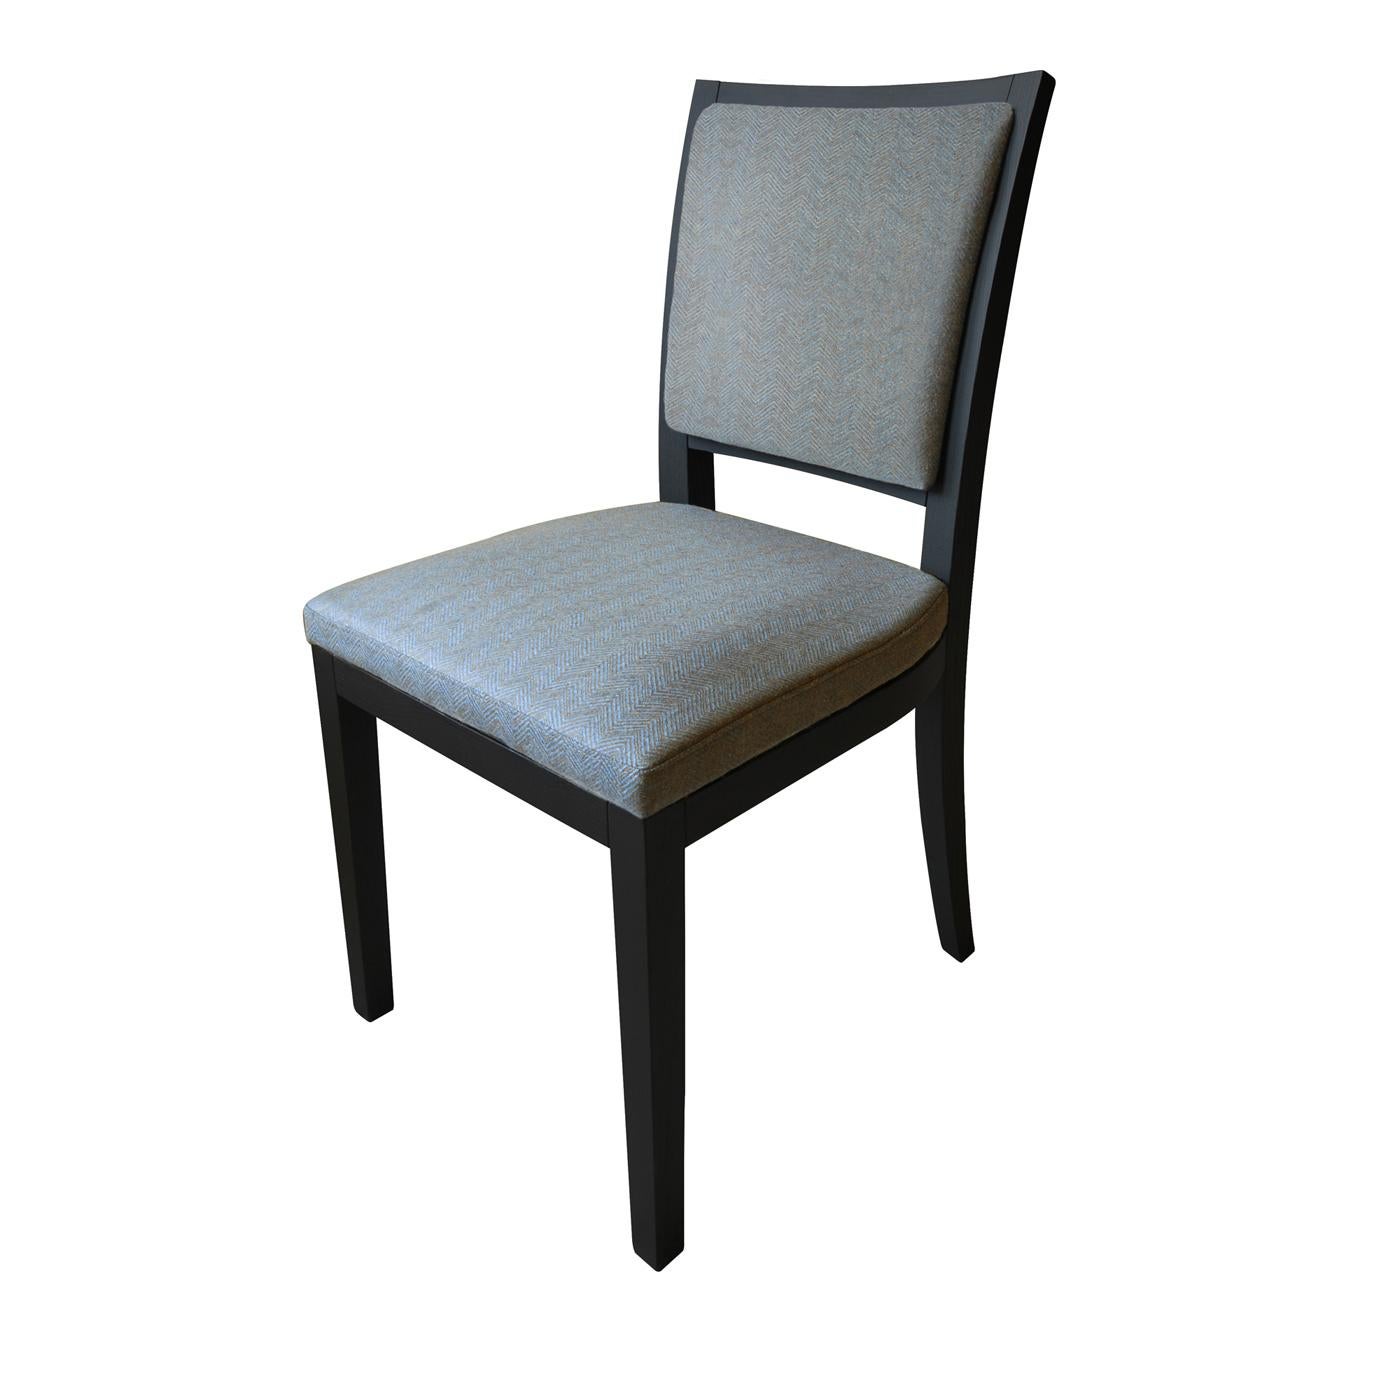 This chair is marked by a surprisingly simple silhouette that exalts its classic sophistication. A sturdy yet comfortable piece, it is composed of a stained solid ash frame with robust legs and slightly slanted backrest, upholstered in an elegant